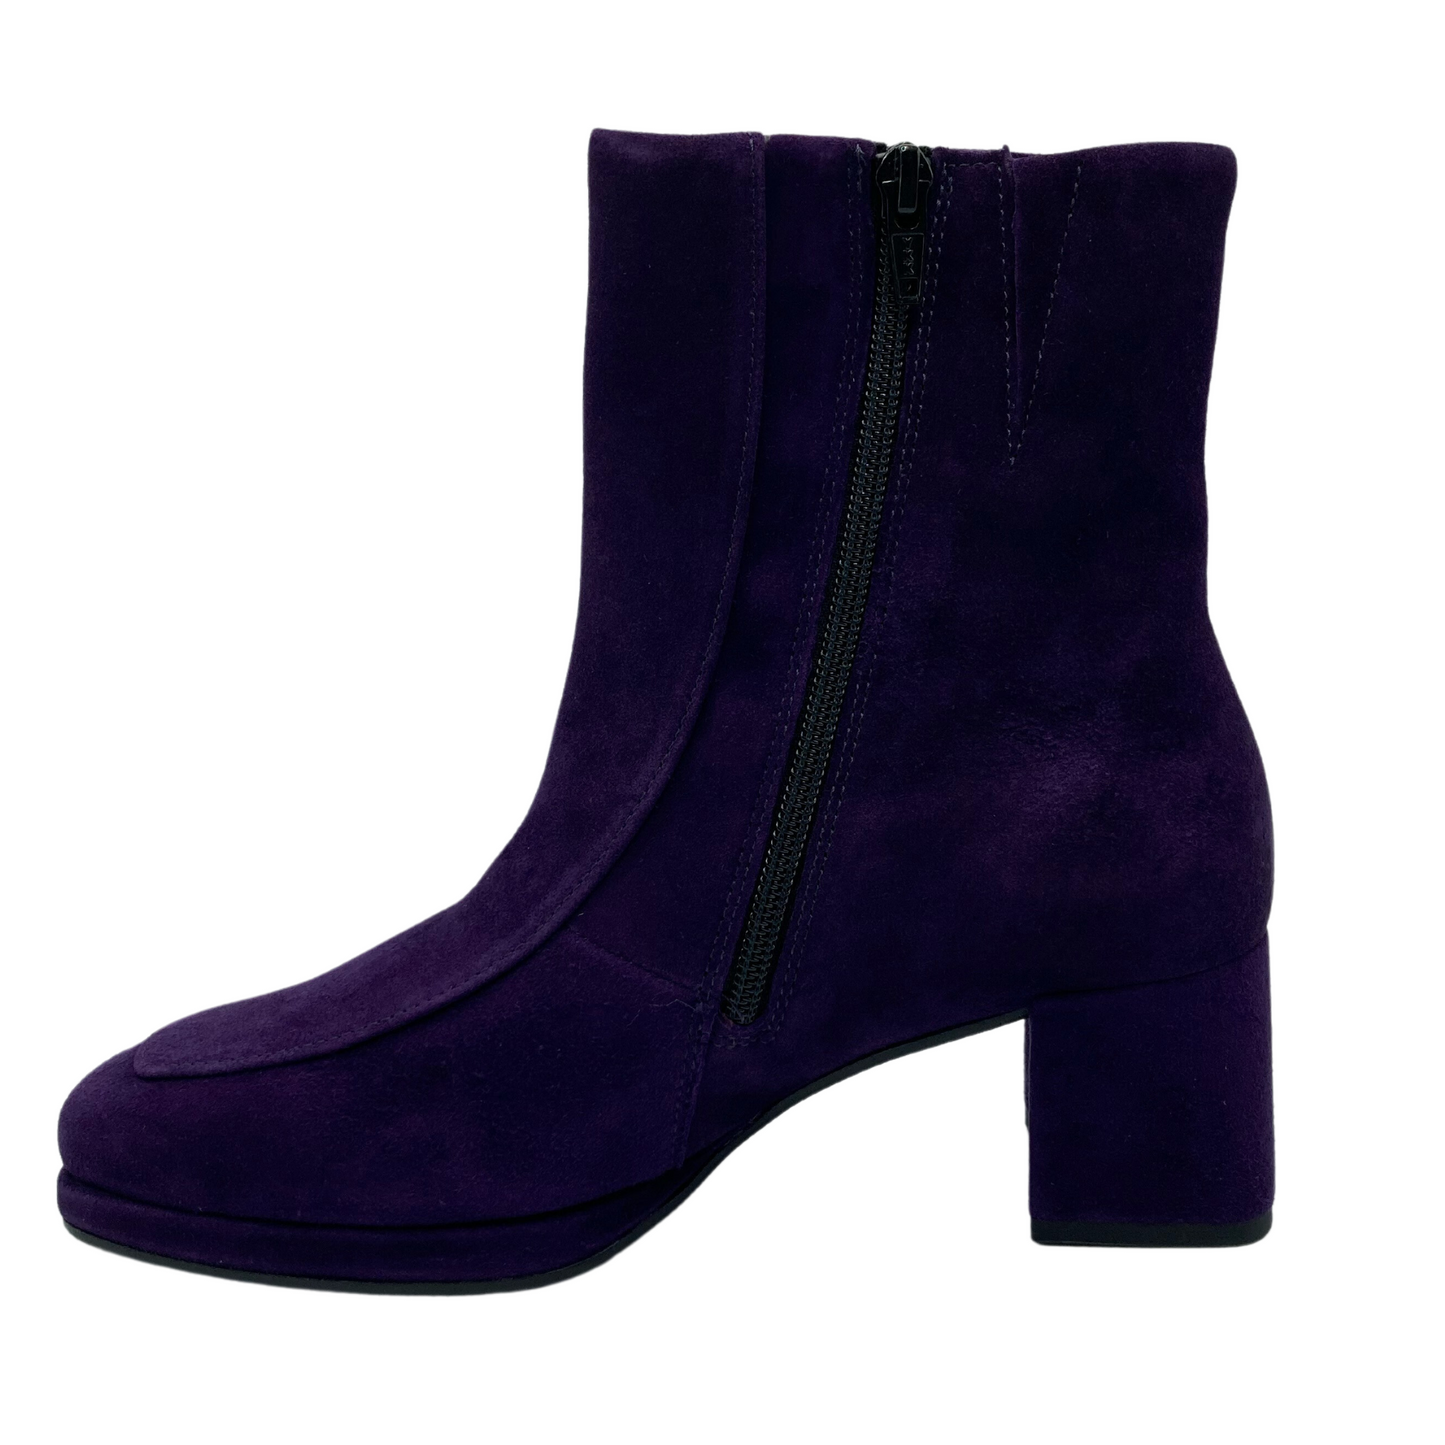 Left facing view of purple suede short boot with block heel with side zipper closure